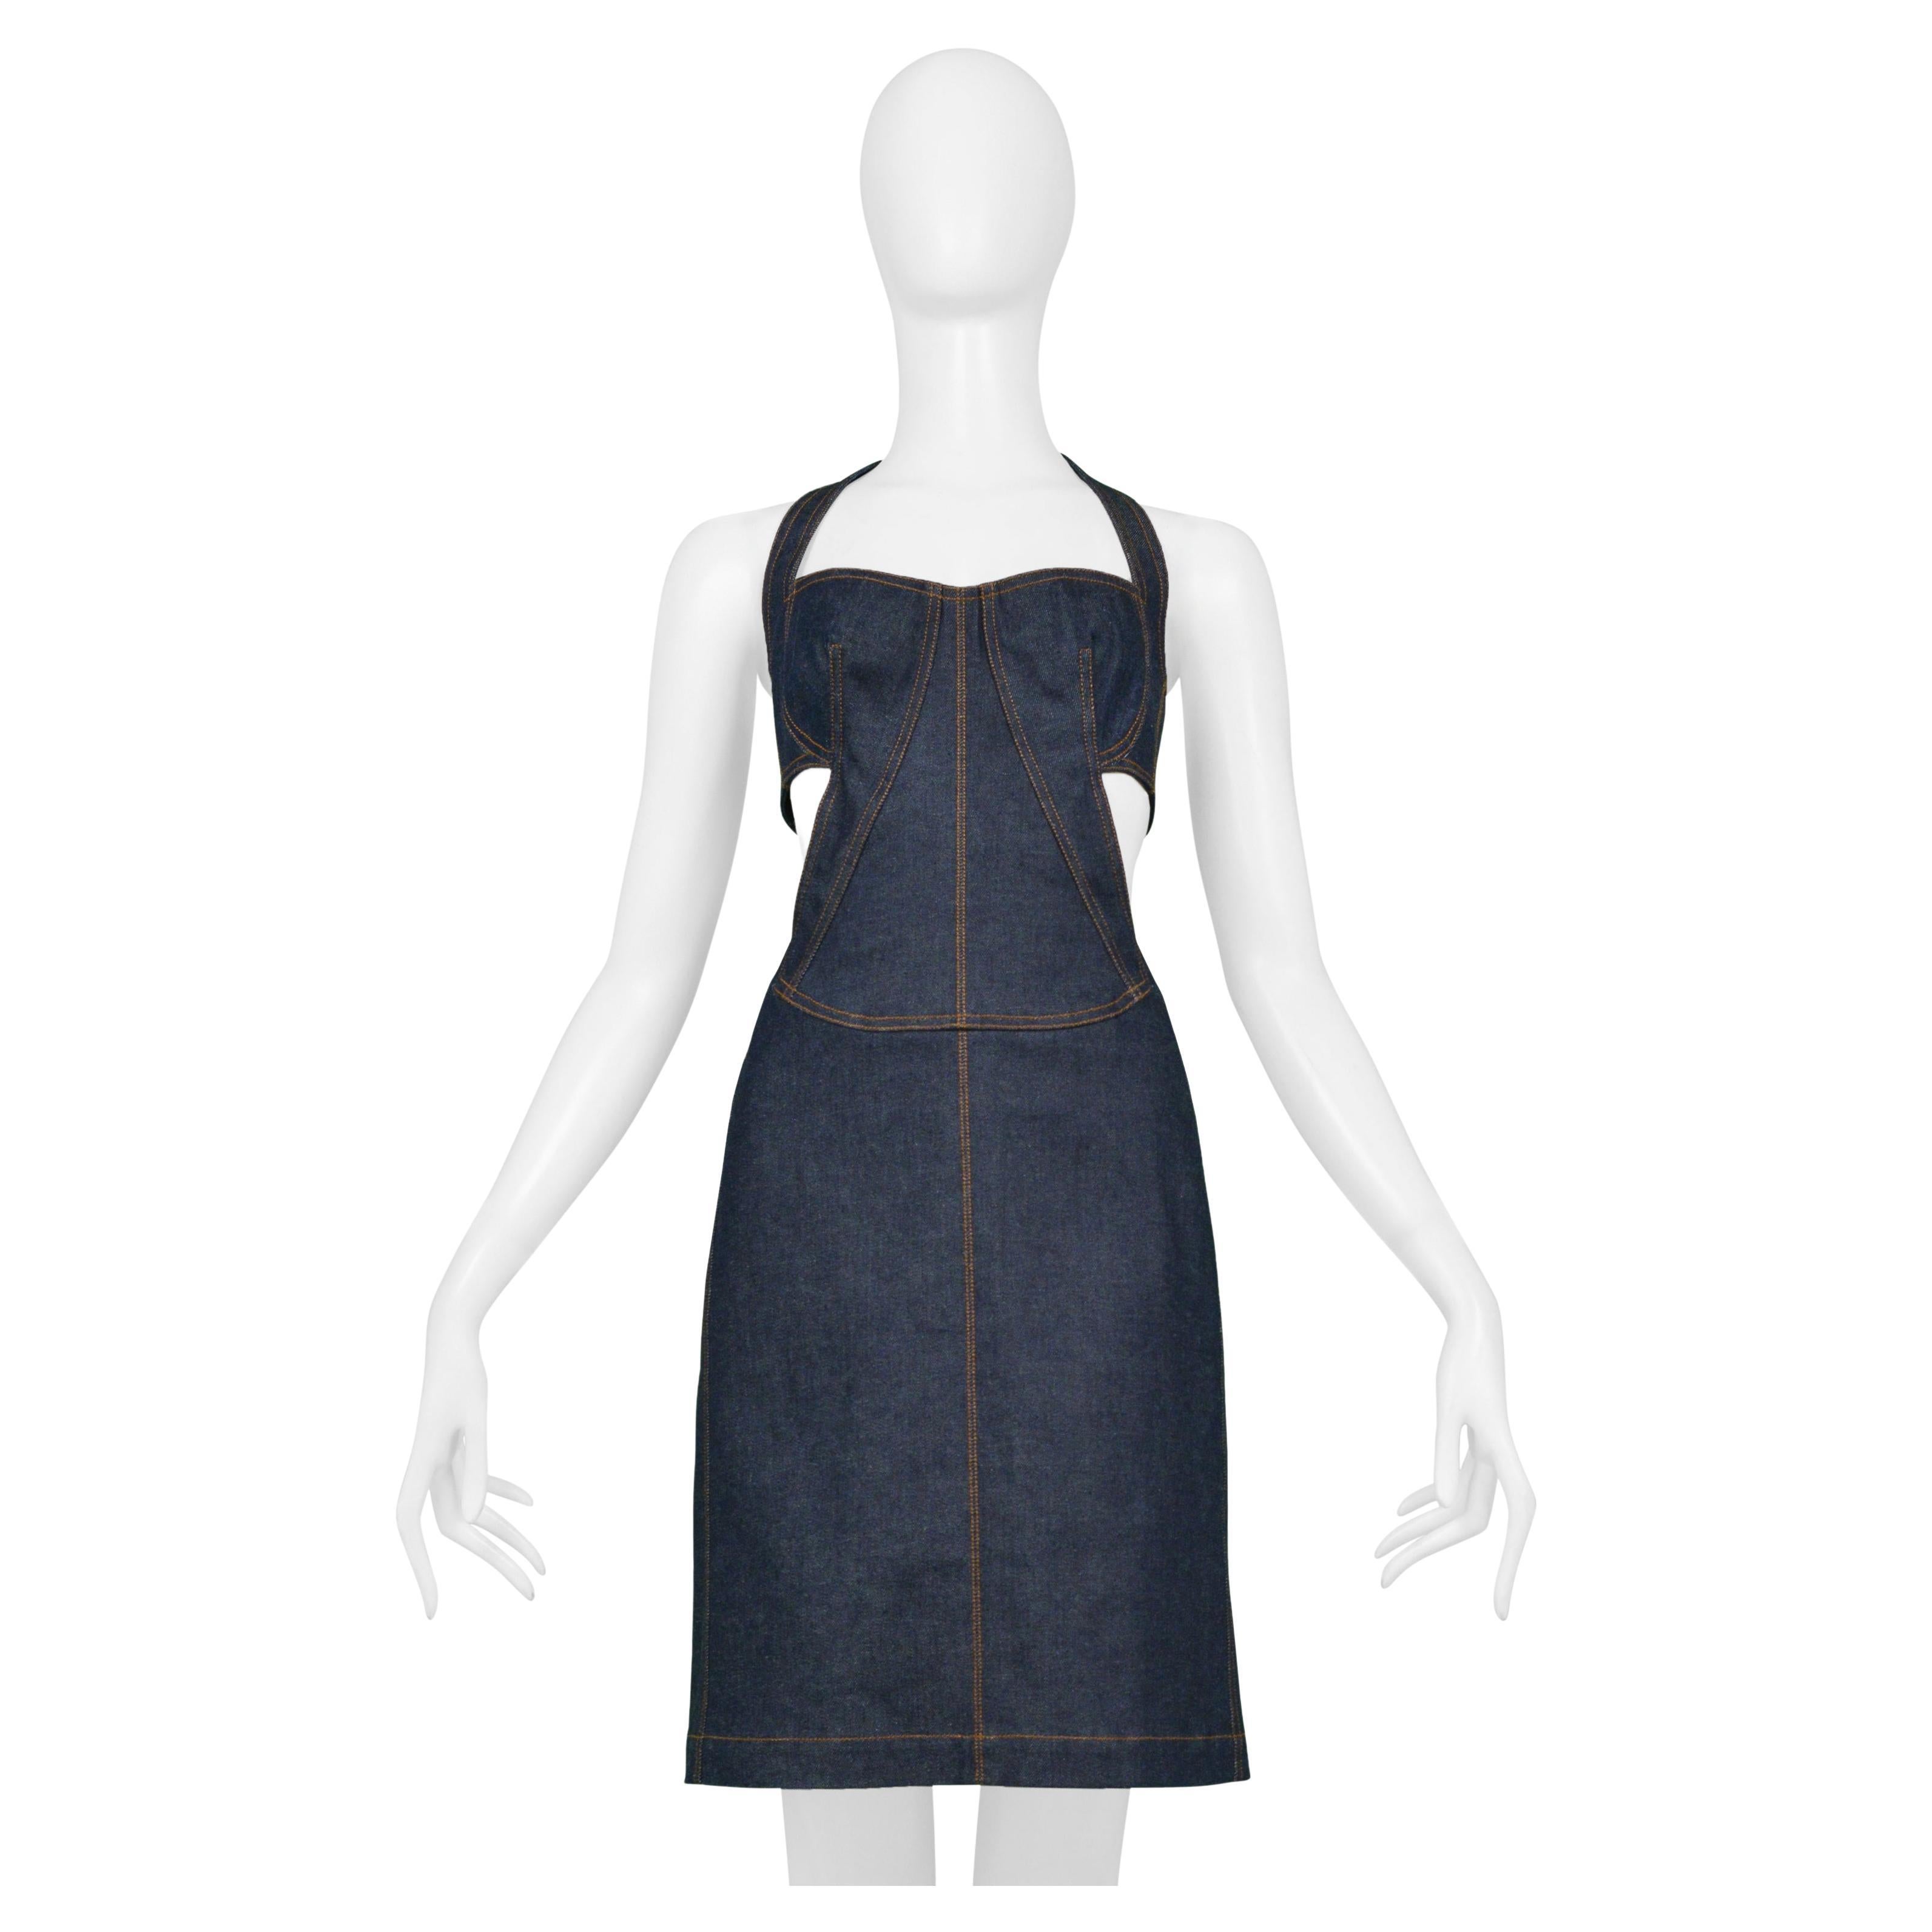 Resurrection Vintage is excited to offer a vintage Azzedine Alaia blue denim dress featuring a 1986 reissued design, cutout back, halter style neck, brown top stitching, and mini dress length. 

Azzedine Alaia Paris
Size 40
98% Cotton, 2%